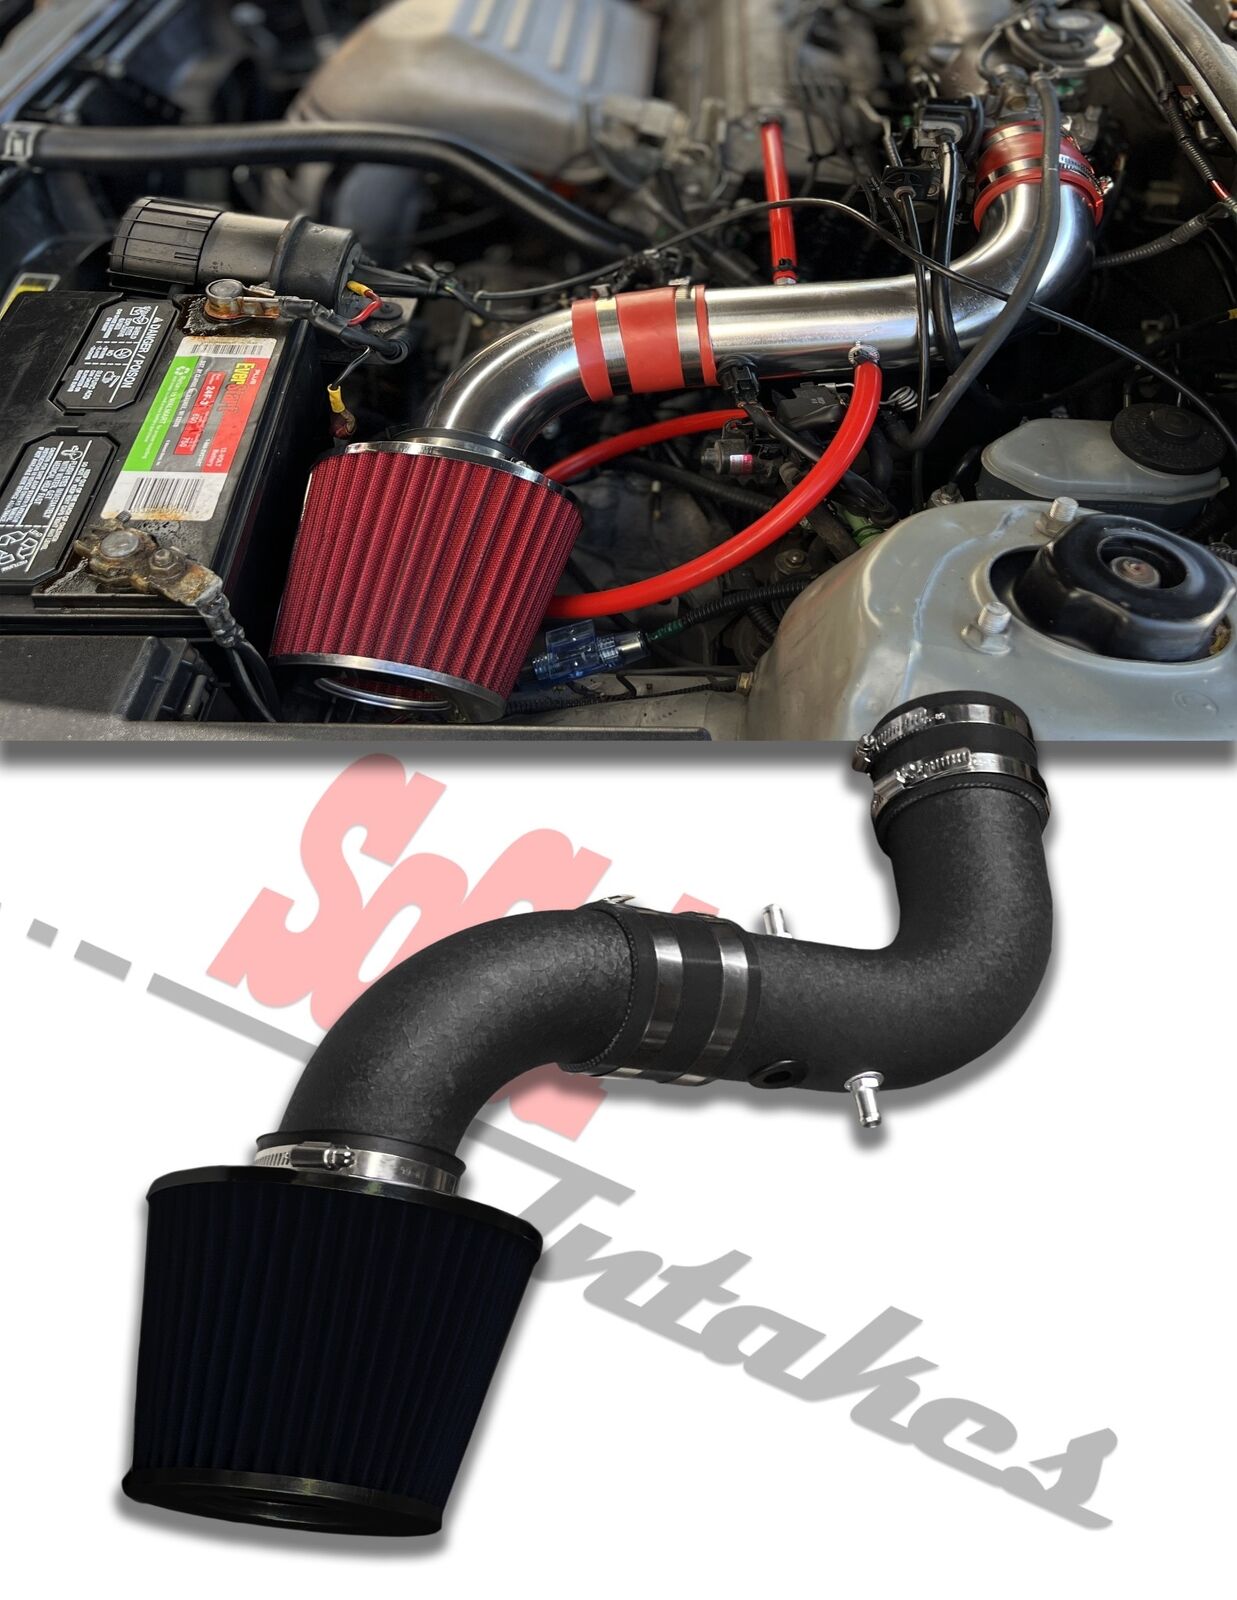 COATED BLACK Air Intake Kit and Filter For 1998-2001 Toyota Camry Solara 2.2L